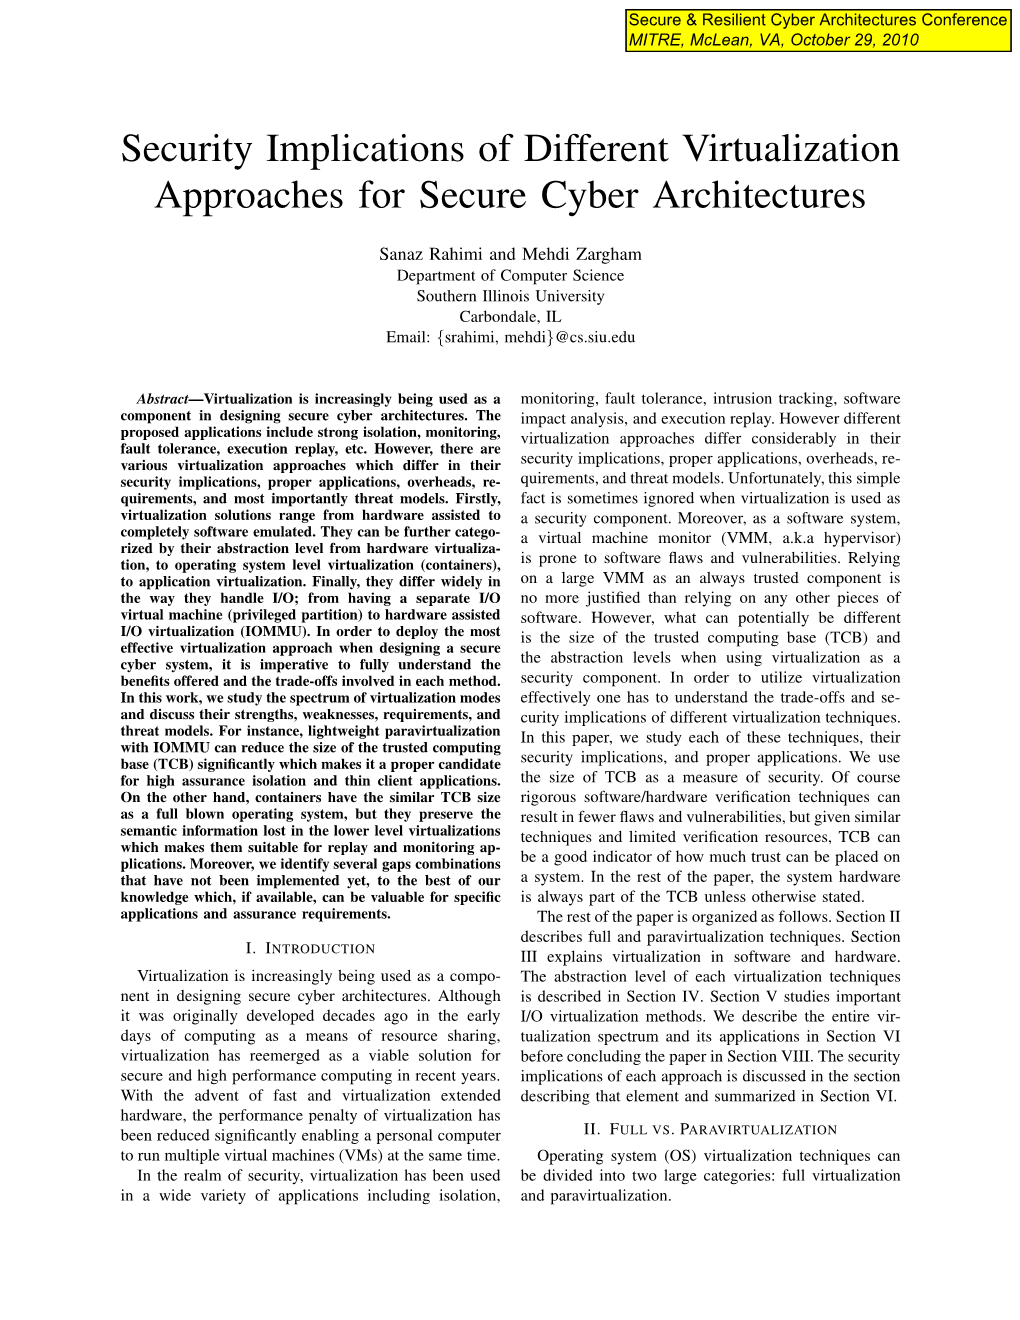 Security Implications of Different Virtualization Approaches for Secure Cyber Architectures